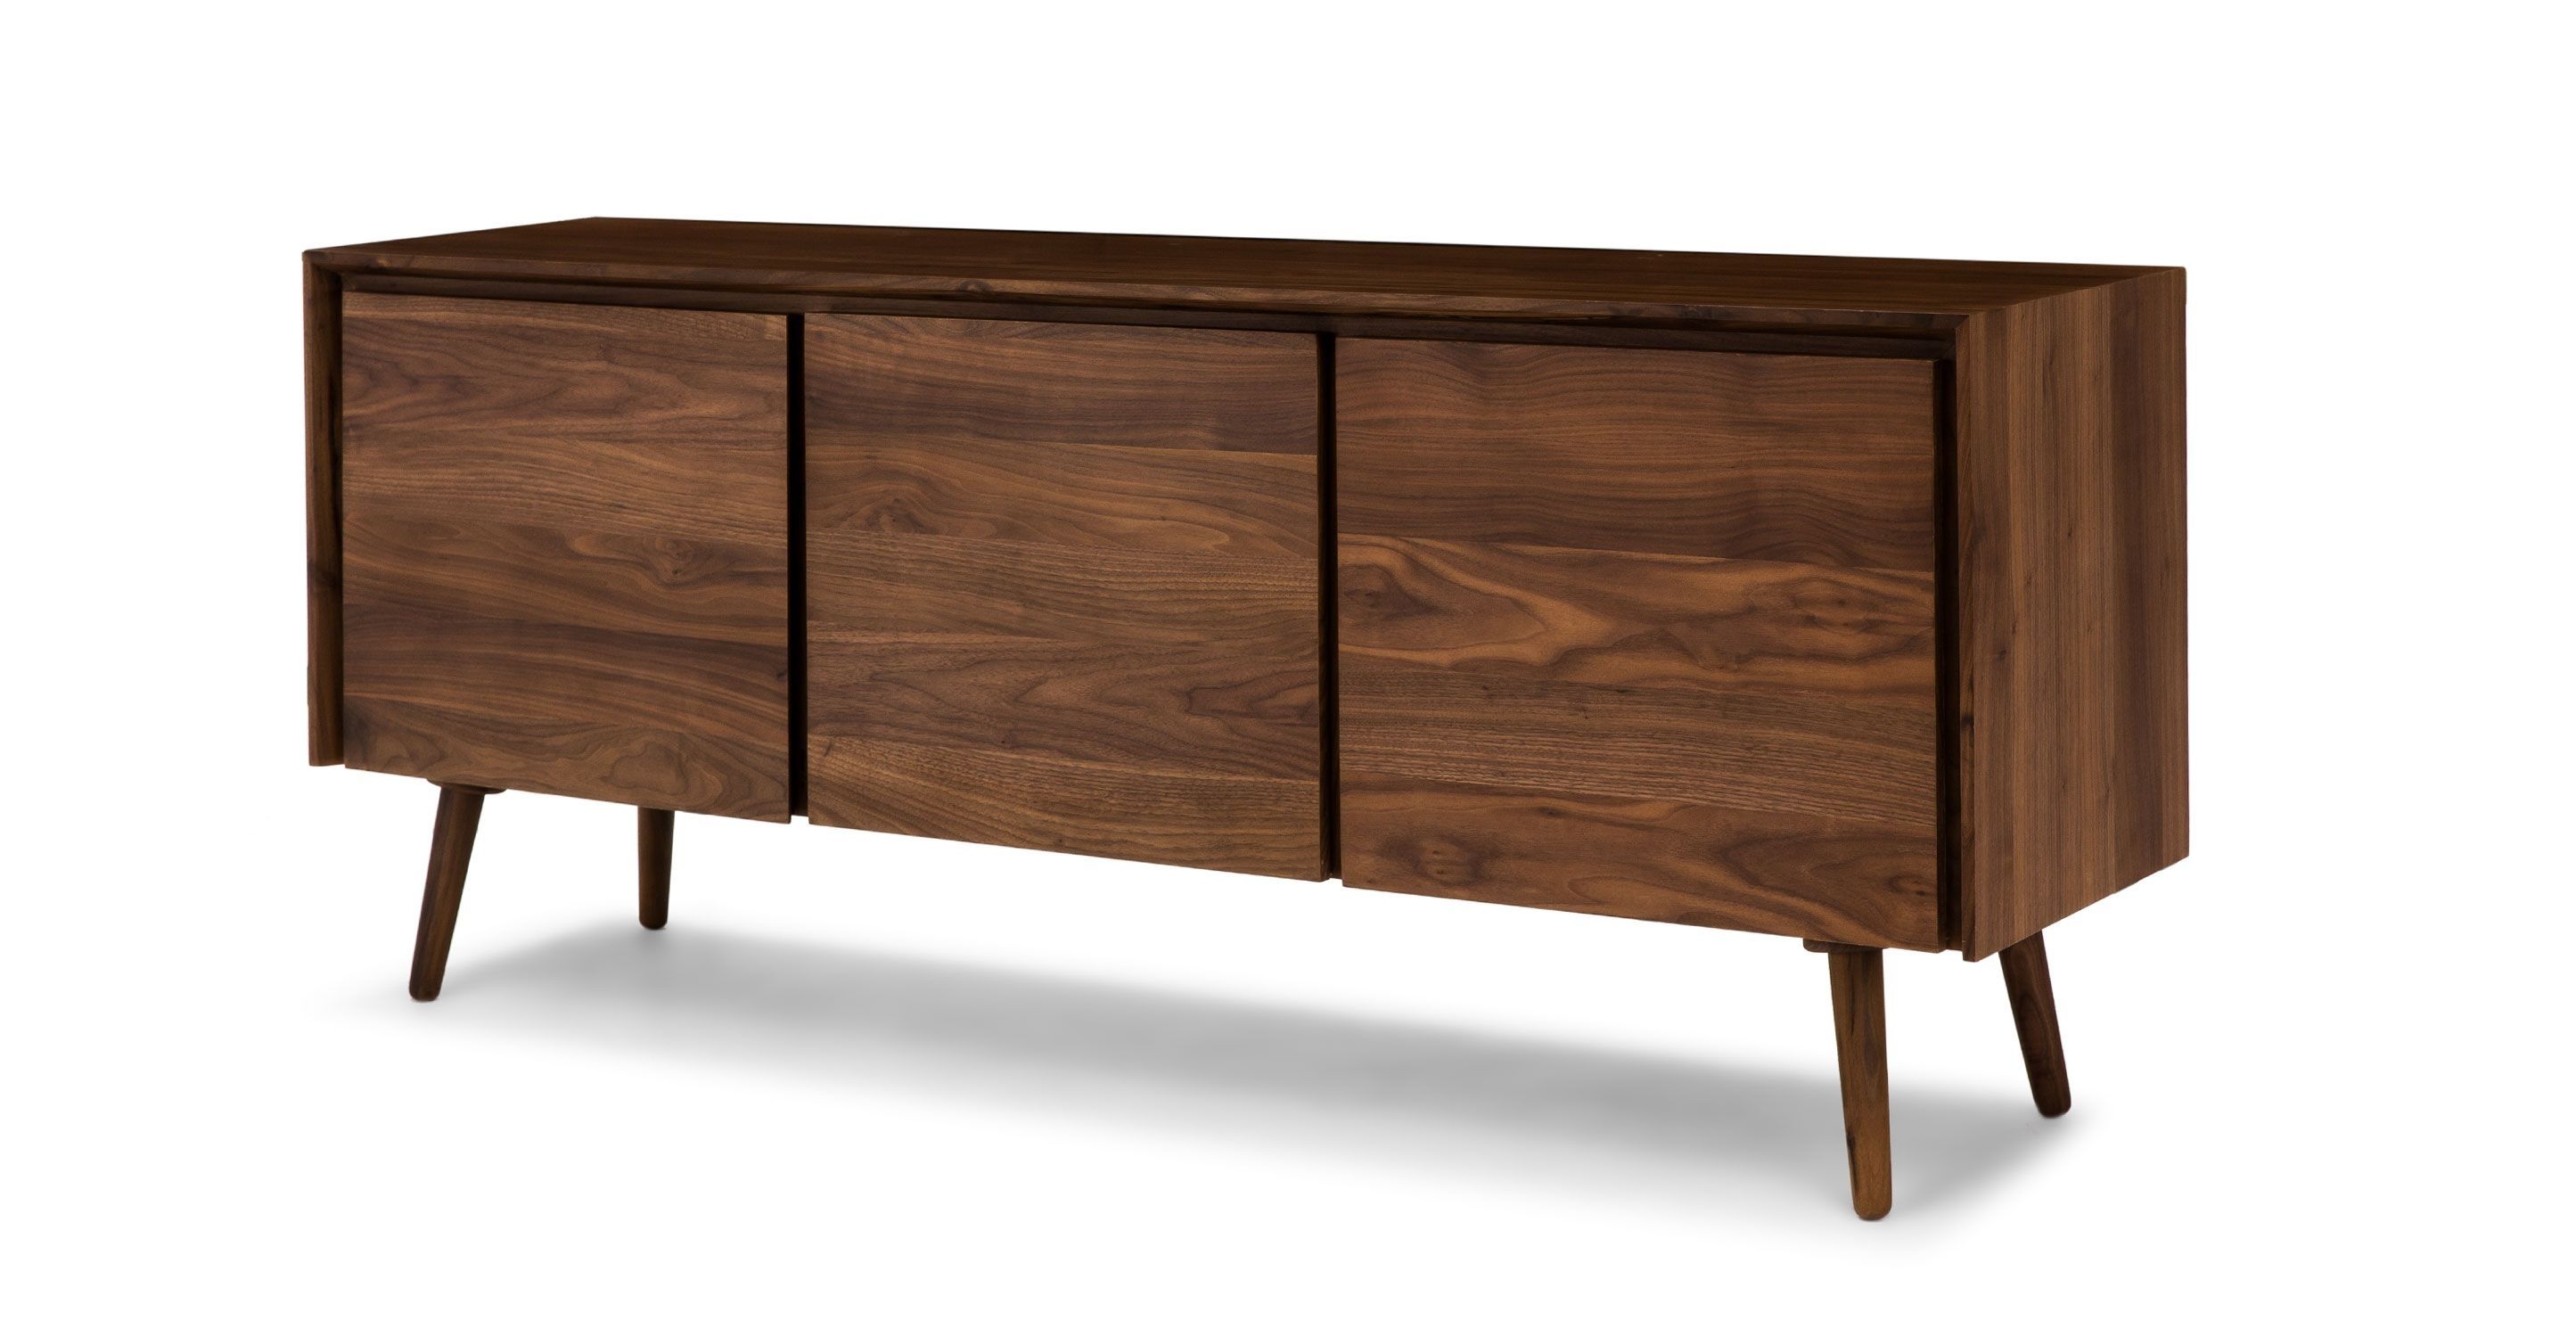 Seno Walnut 71" Sideboard | Window Shopping For The Home | Pinterest With Most Up To Date Lockwood Sideboards (View 8 of 20)